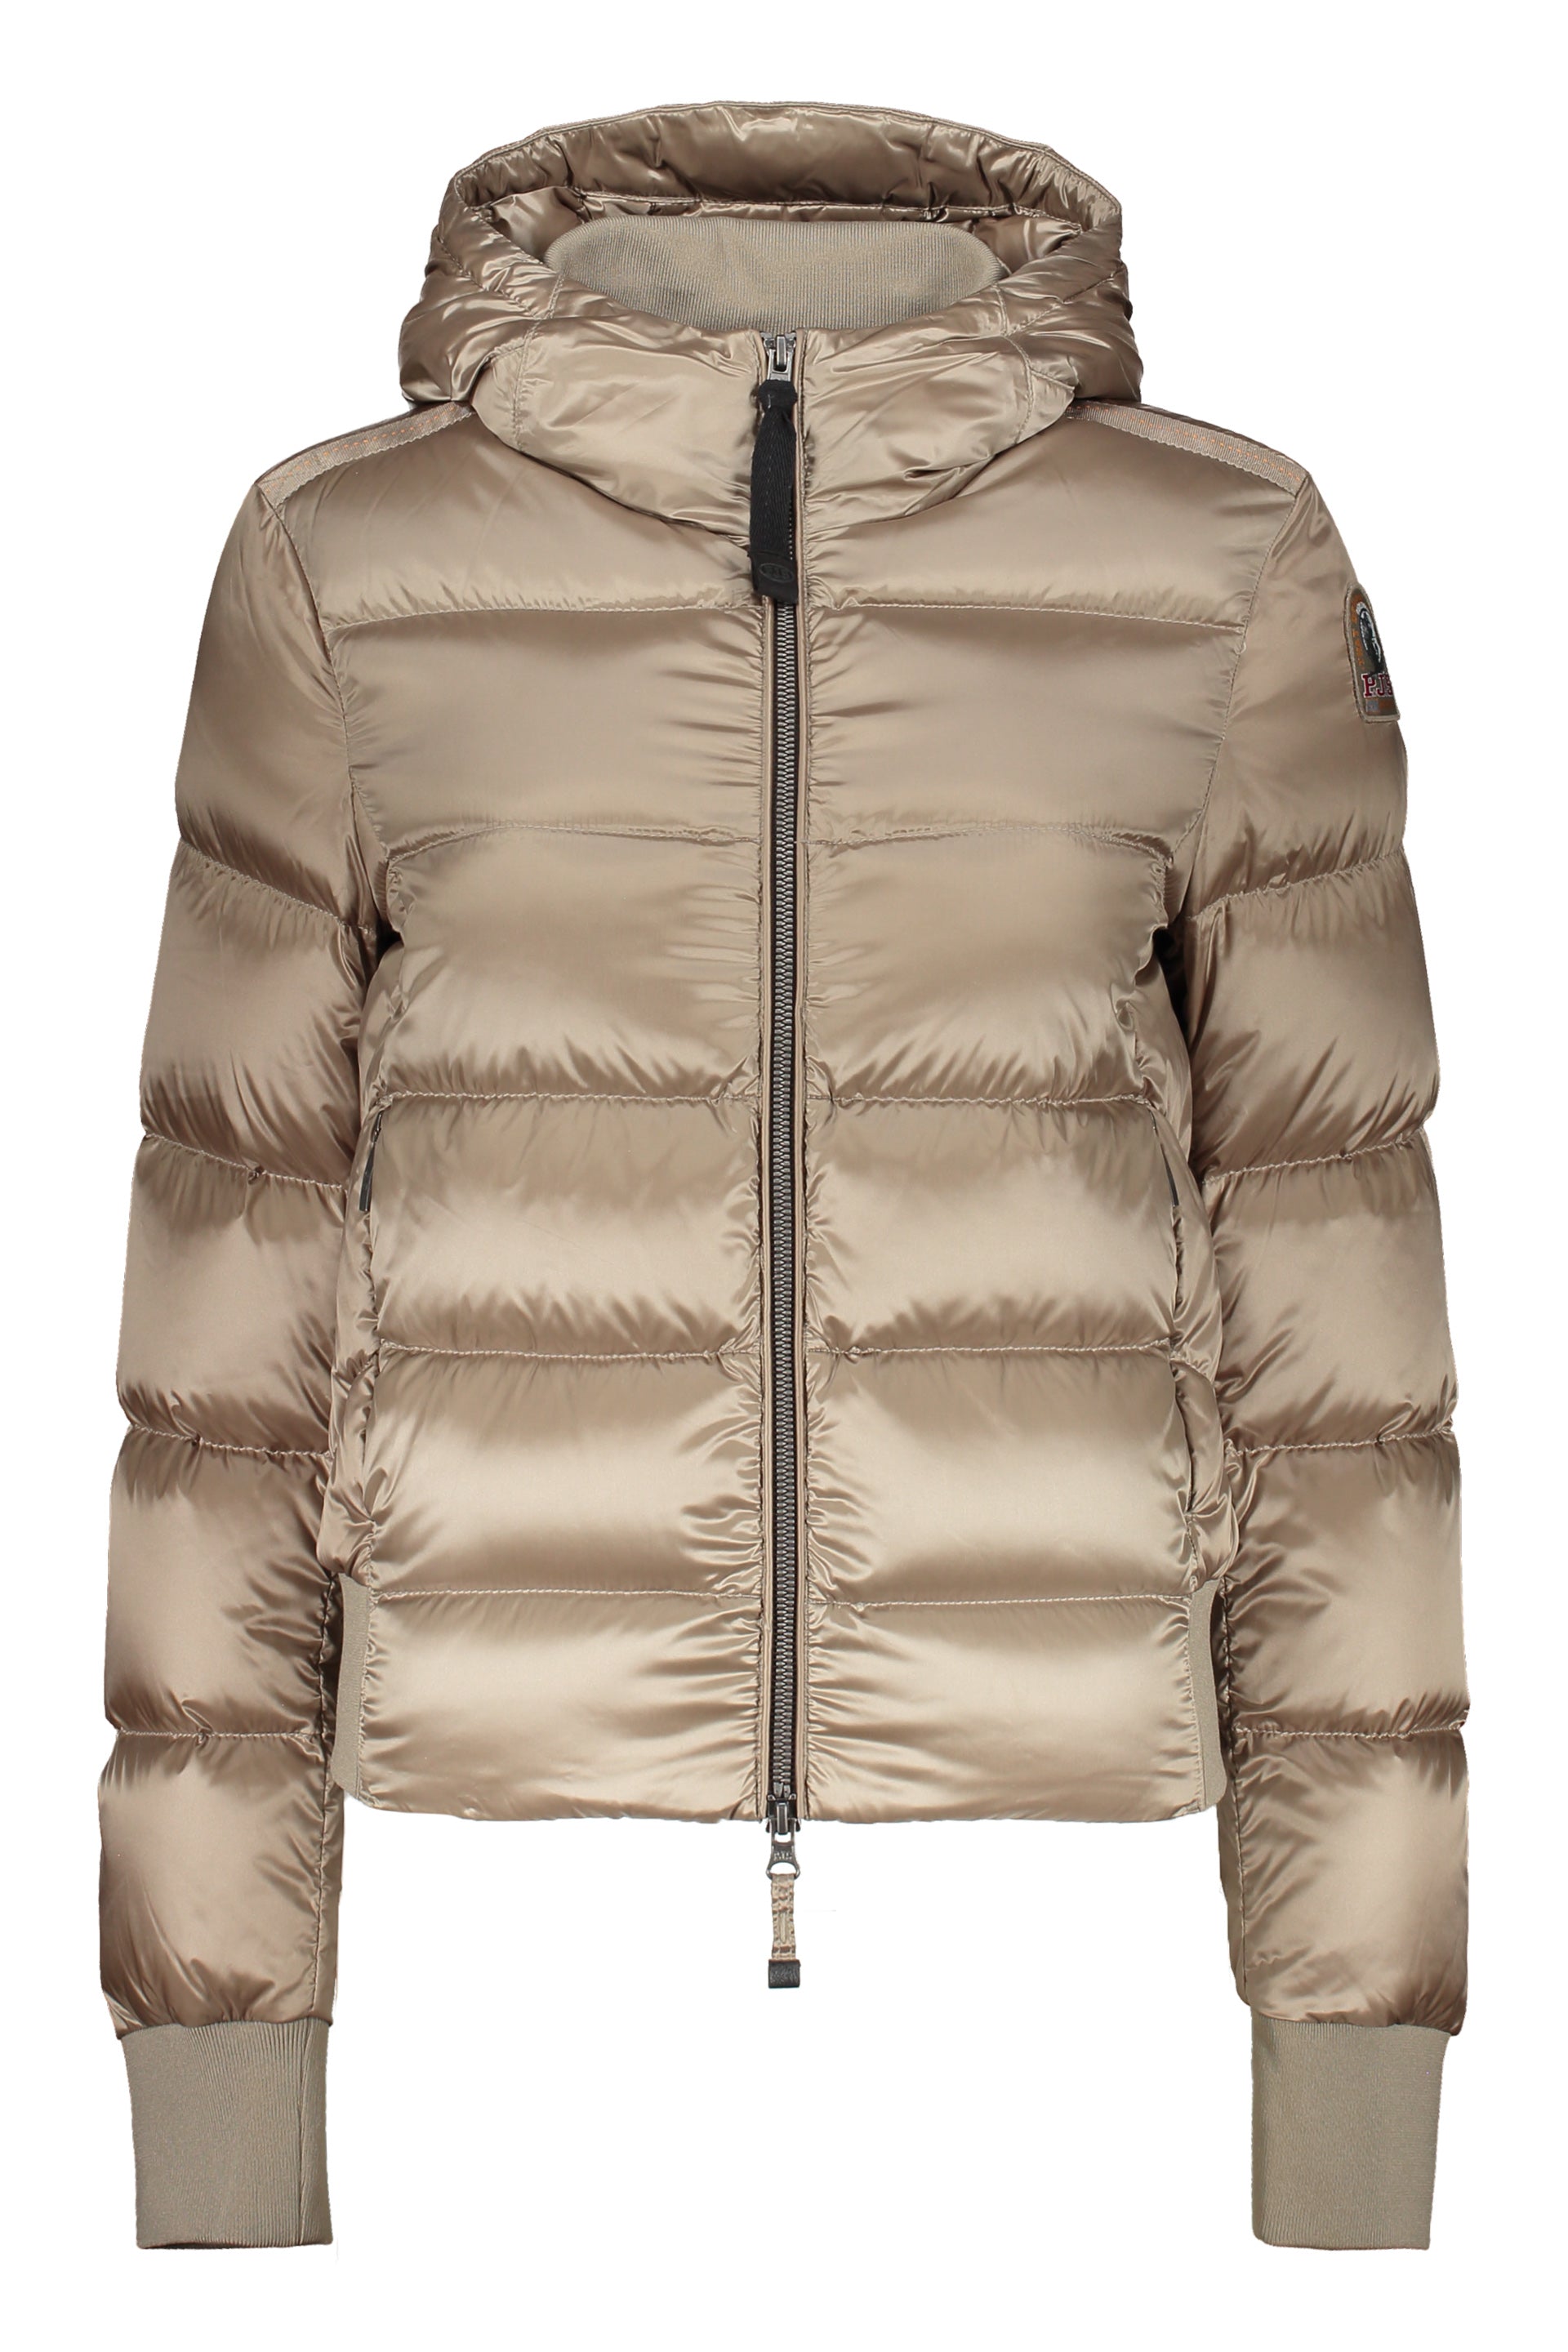 Parajumpers-OUTLET-SALE-Mariah-hooded-down-jacket-Jacken-Mantel-XS-ARCHIVE-COLLECTION.jpg